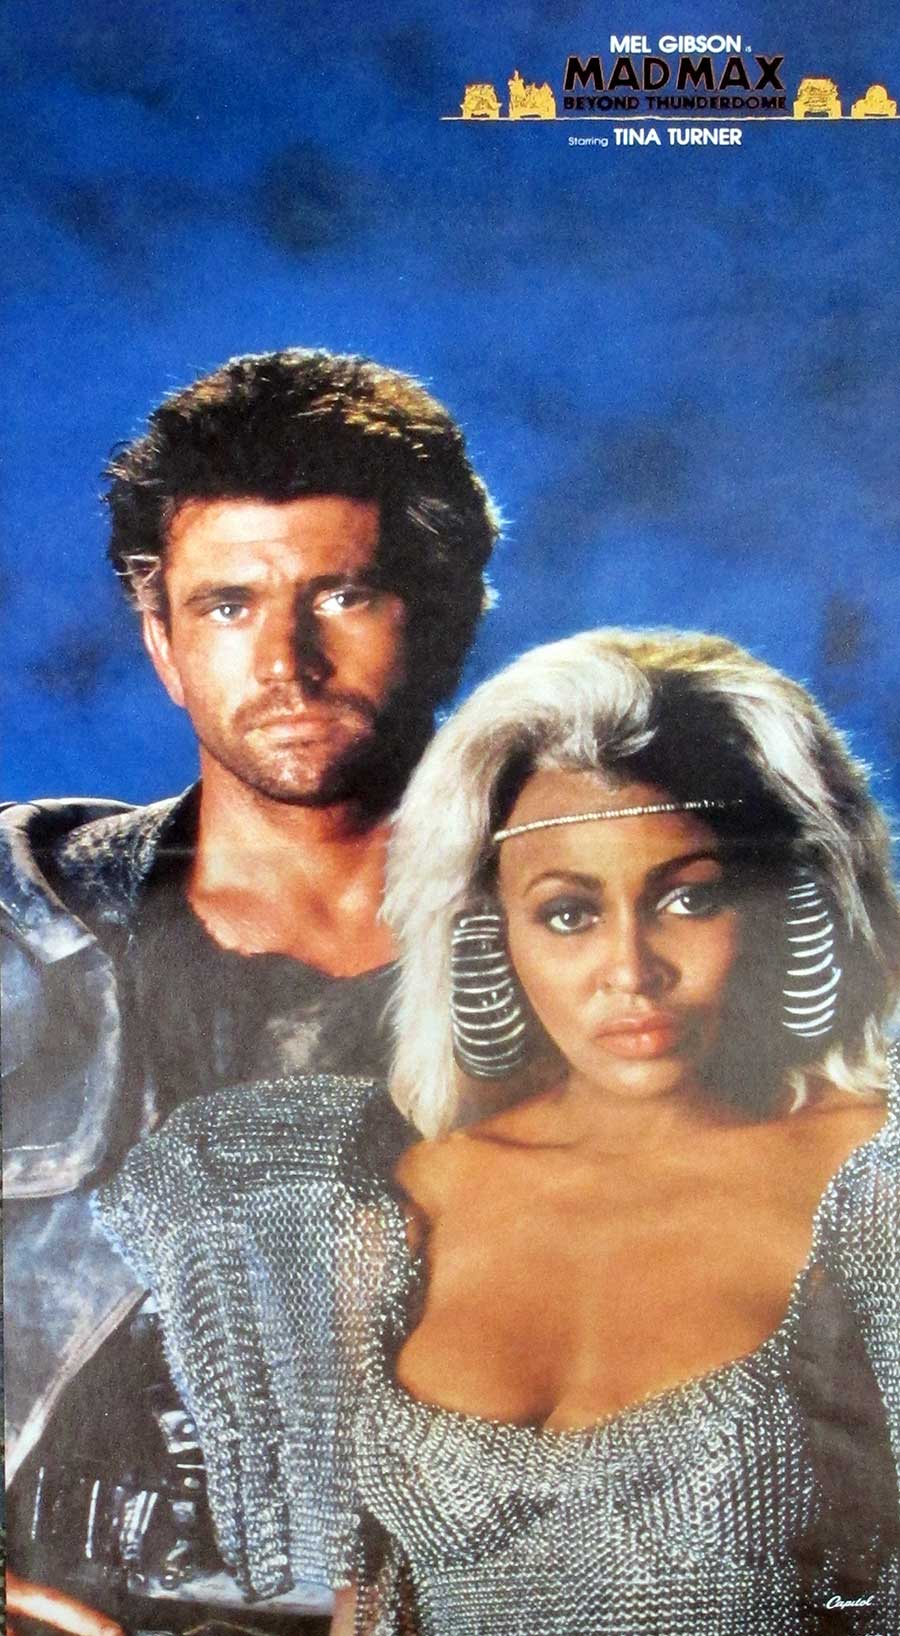    <h1 class="text-center text-uppercase"> MAD MAX BEYOND THUNDERDOME PERFORMED BY TINA TURNER Gatefold album Cover 12" LP VINYL ALBUM</h1>
            <p class="lead text-center mt-2">This album "MAD MAX Beyond Thunderdome Performed by Tina Turner"  is a 1985 Australian post-apocalyptic film directed by George Miller and George Ogilvie, written by Miller, Doug Mitchell and Terry Hayes, and starring Mel Gibson and Tina Turner. It is the third installment in the action movie Mad Max franchise. The original music score was composed by Maurice Jarre. This web-page has hi-res photos of the album covers, record label and a detailed description.</p>